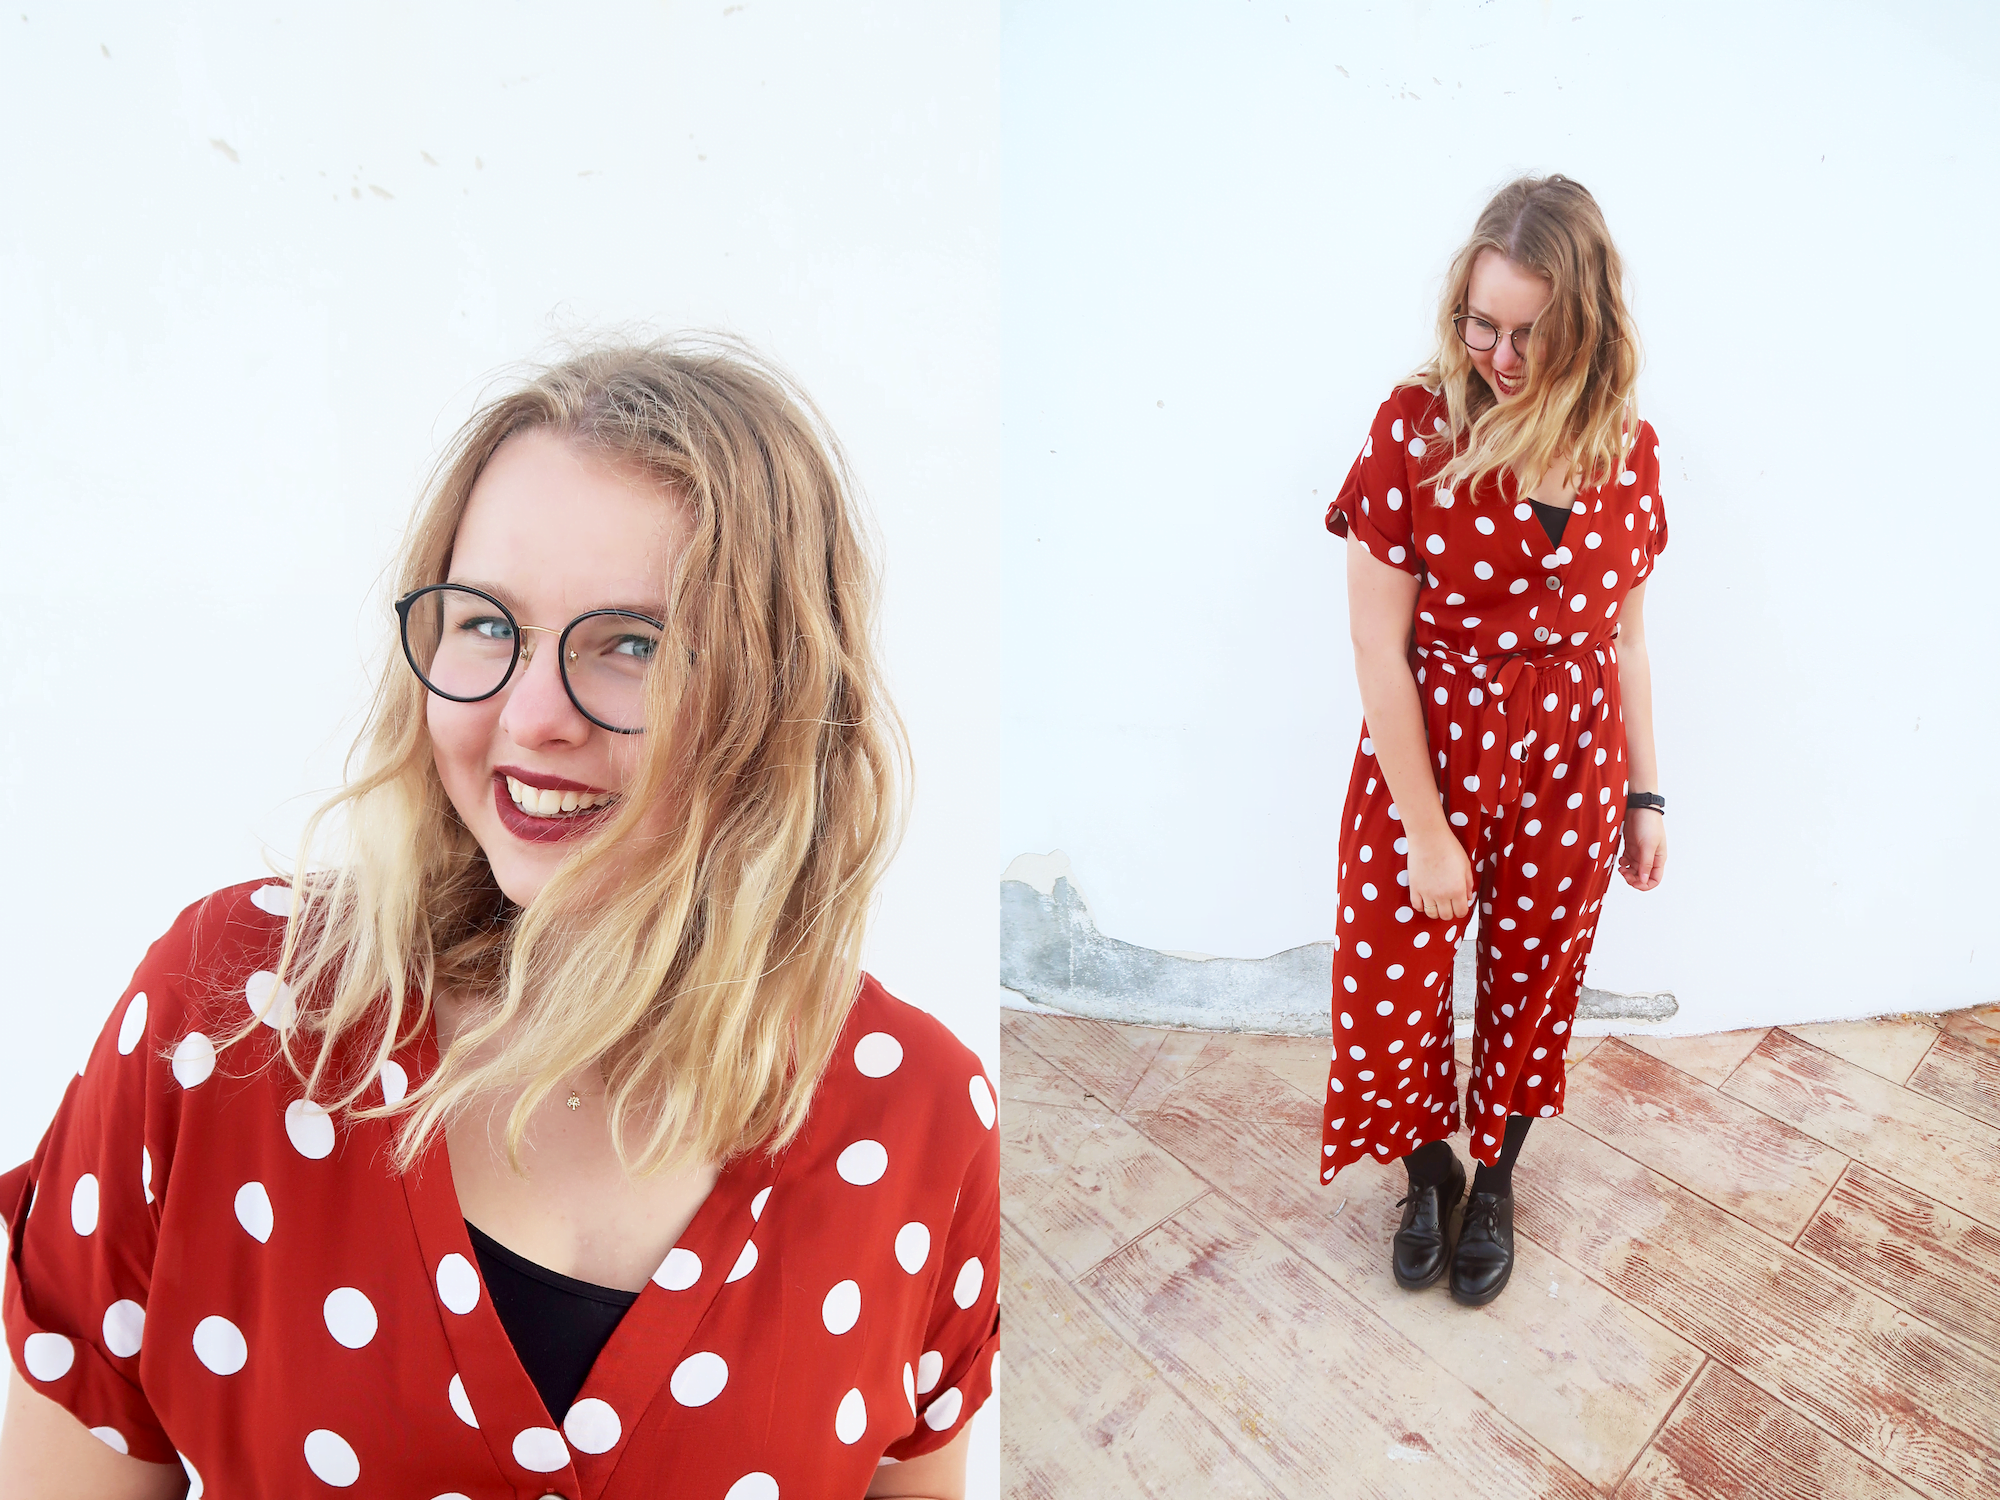 You can’t have a bad day in polka dots